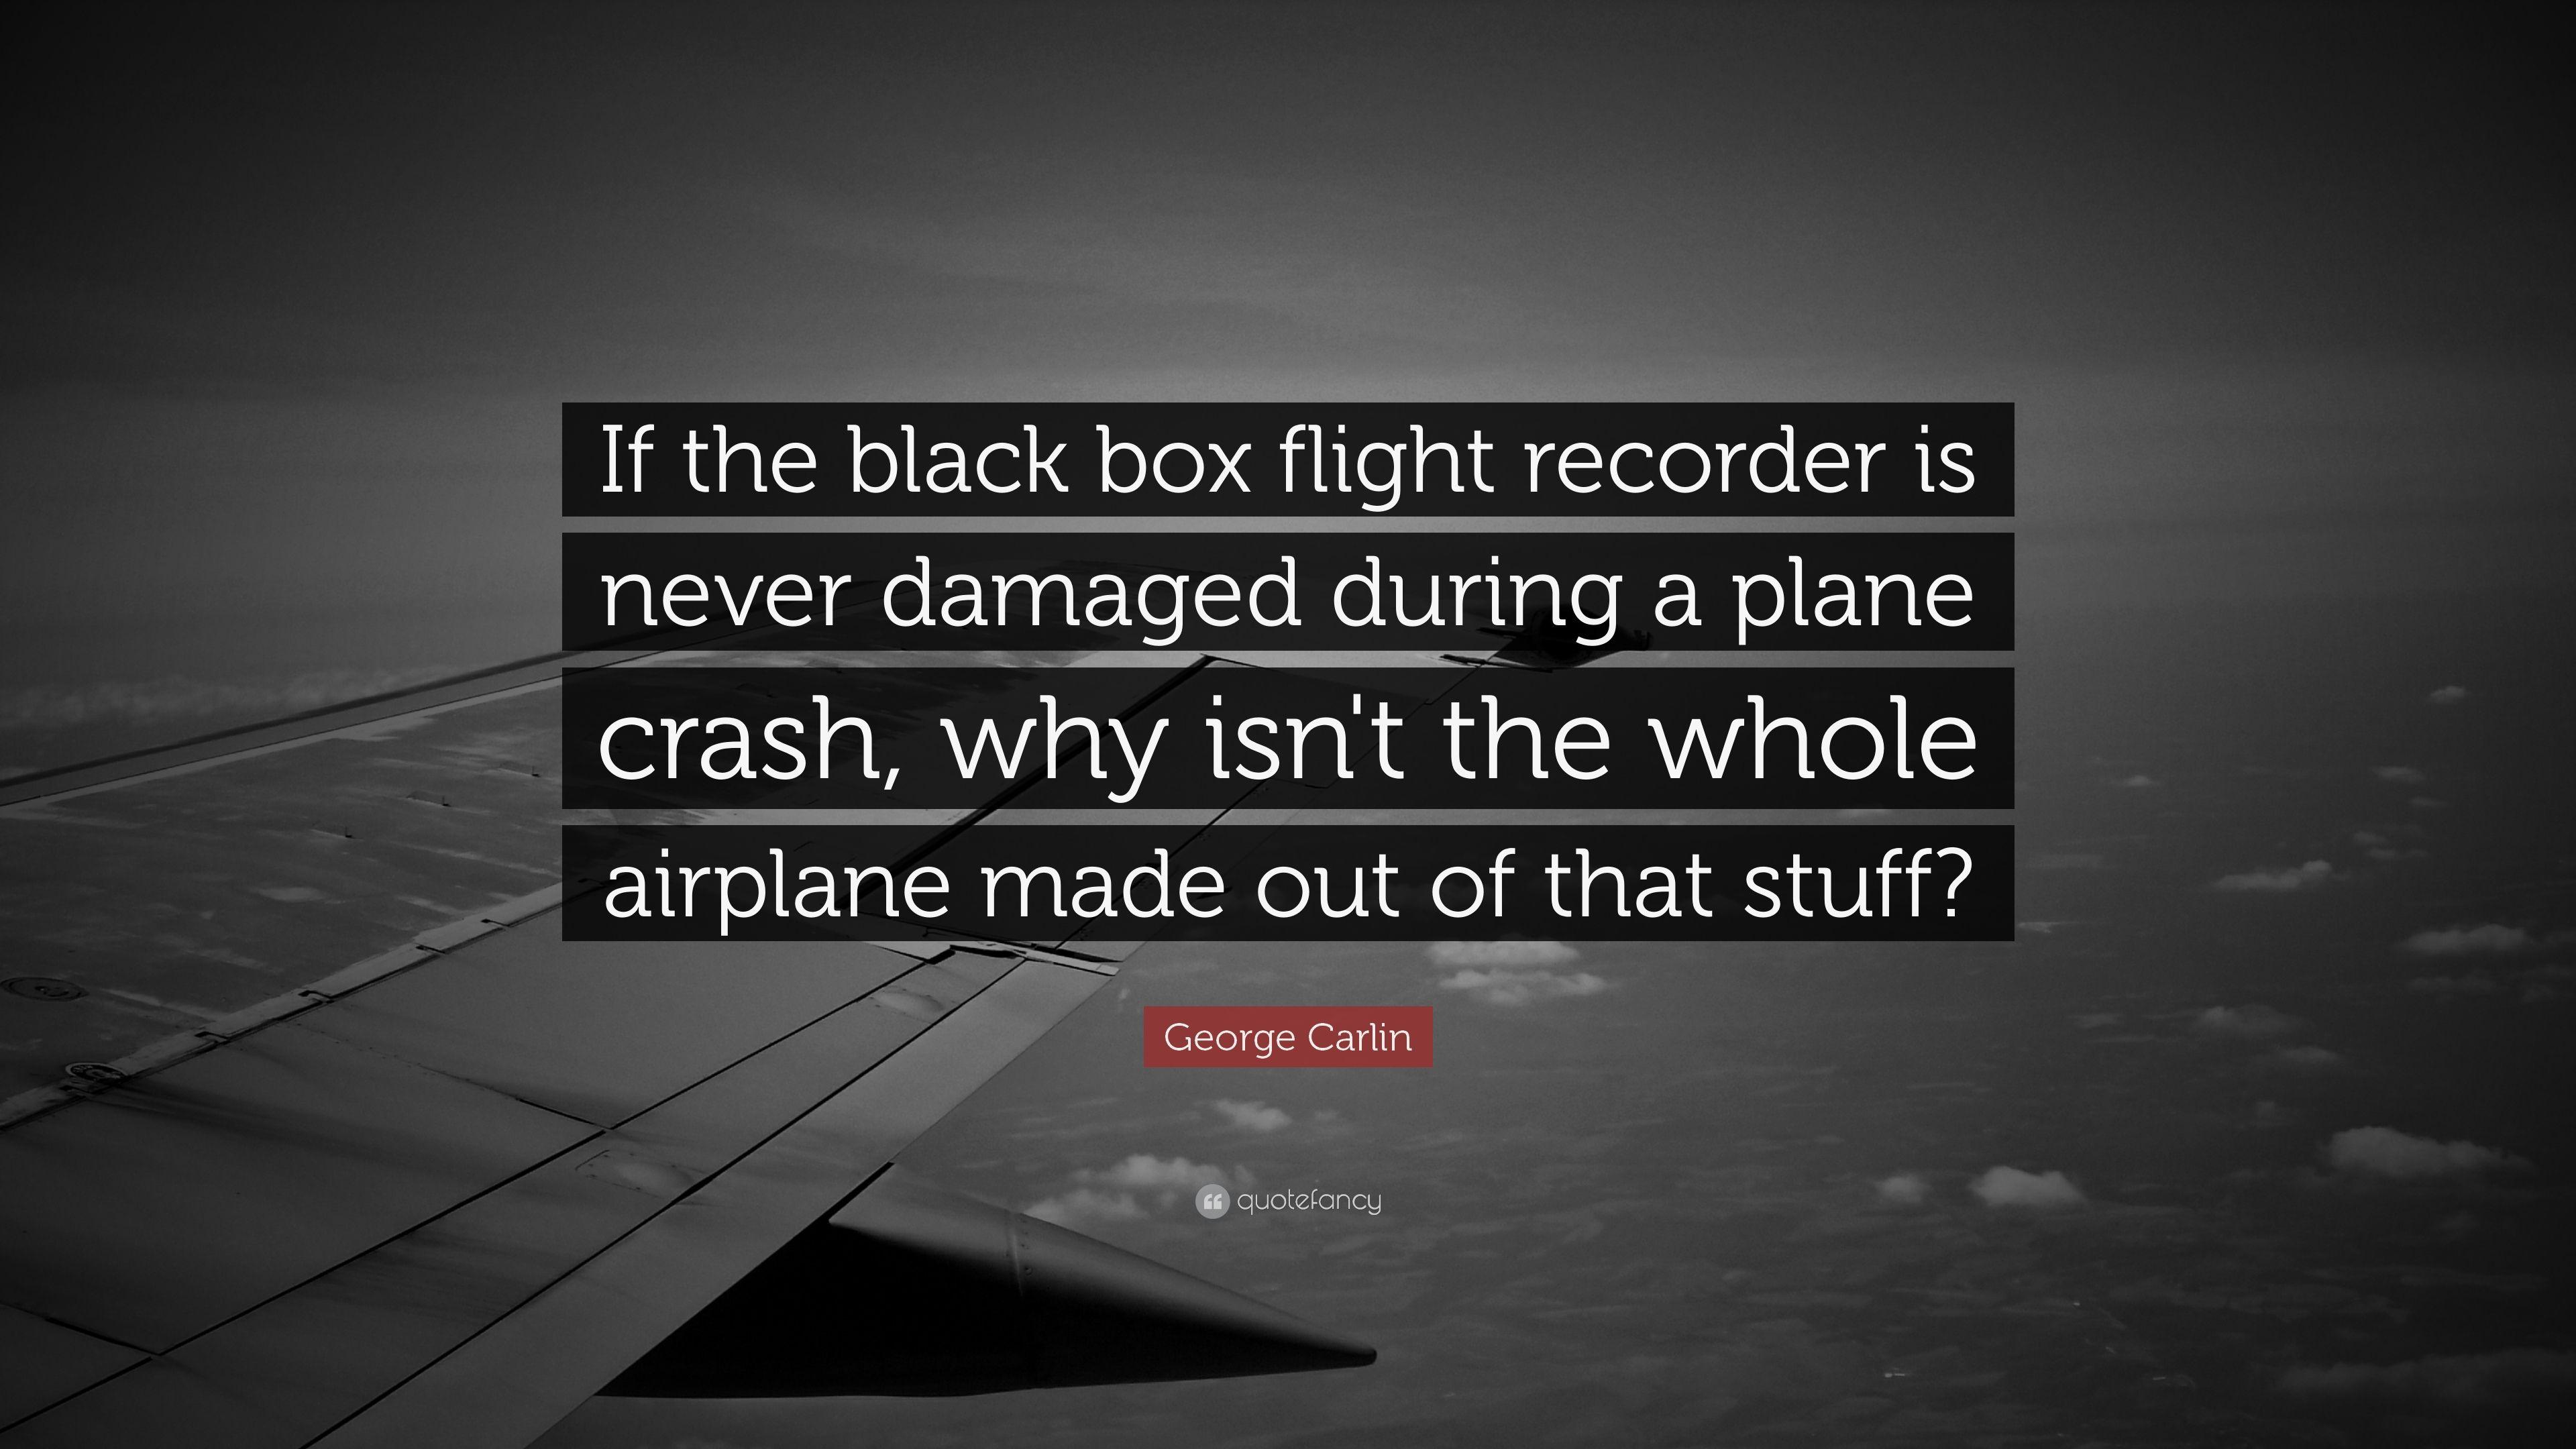 George Carlin Quote: “If the black box flight recorder is never